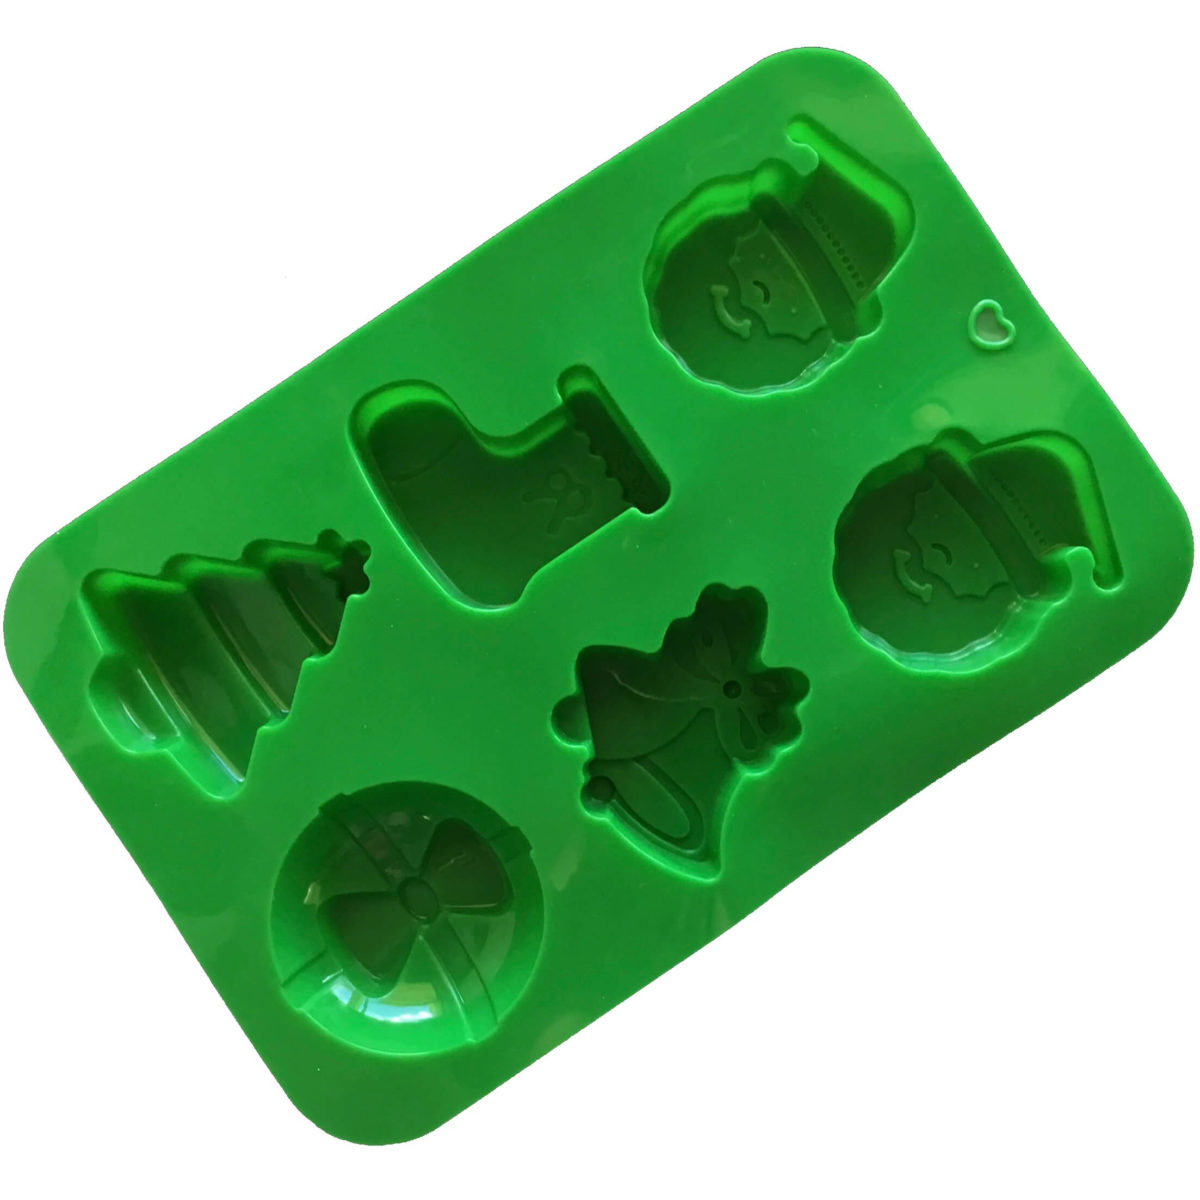 back of green christmas themed silcone mould with santa, stocking, bells, bauble and christmas tree cavities